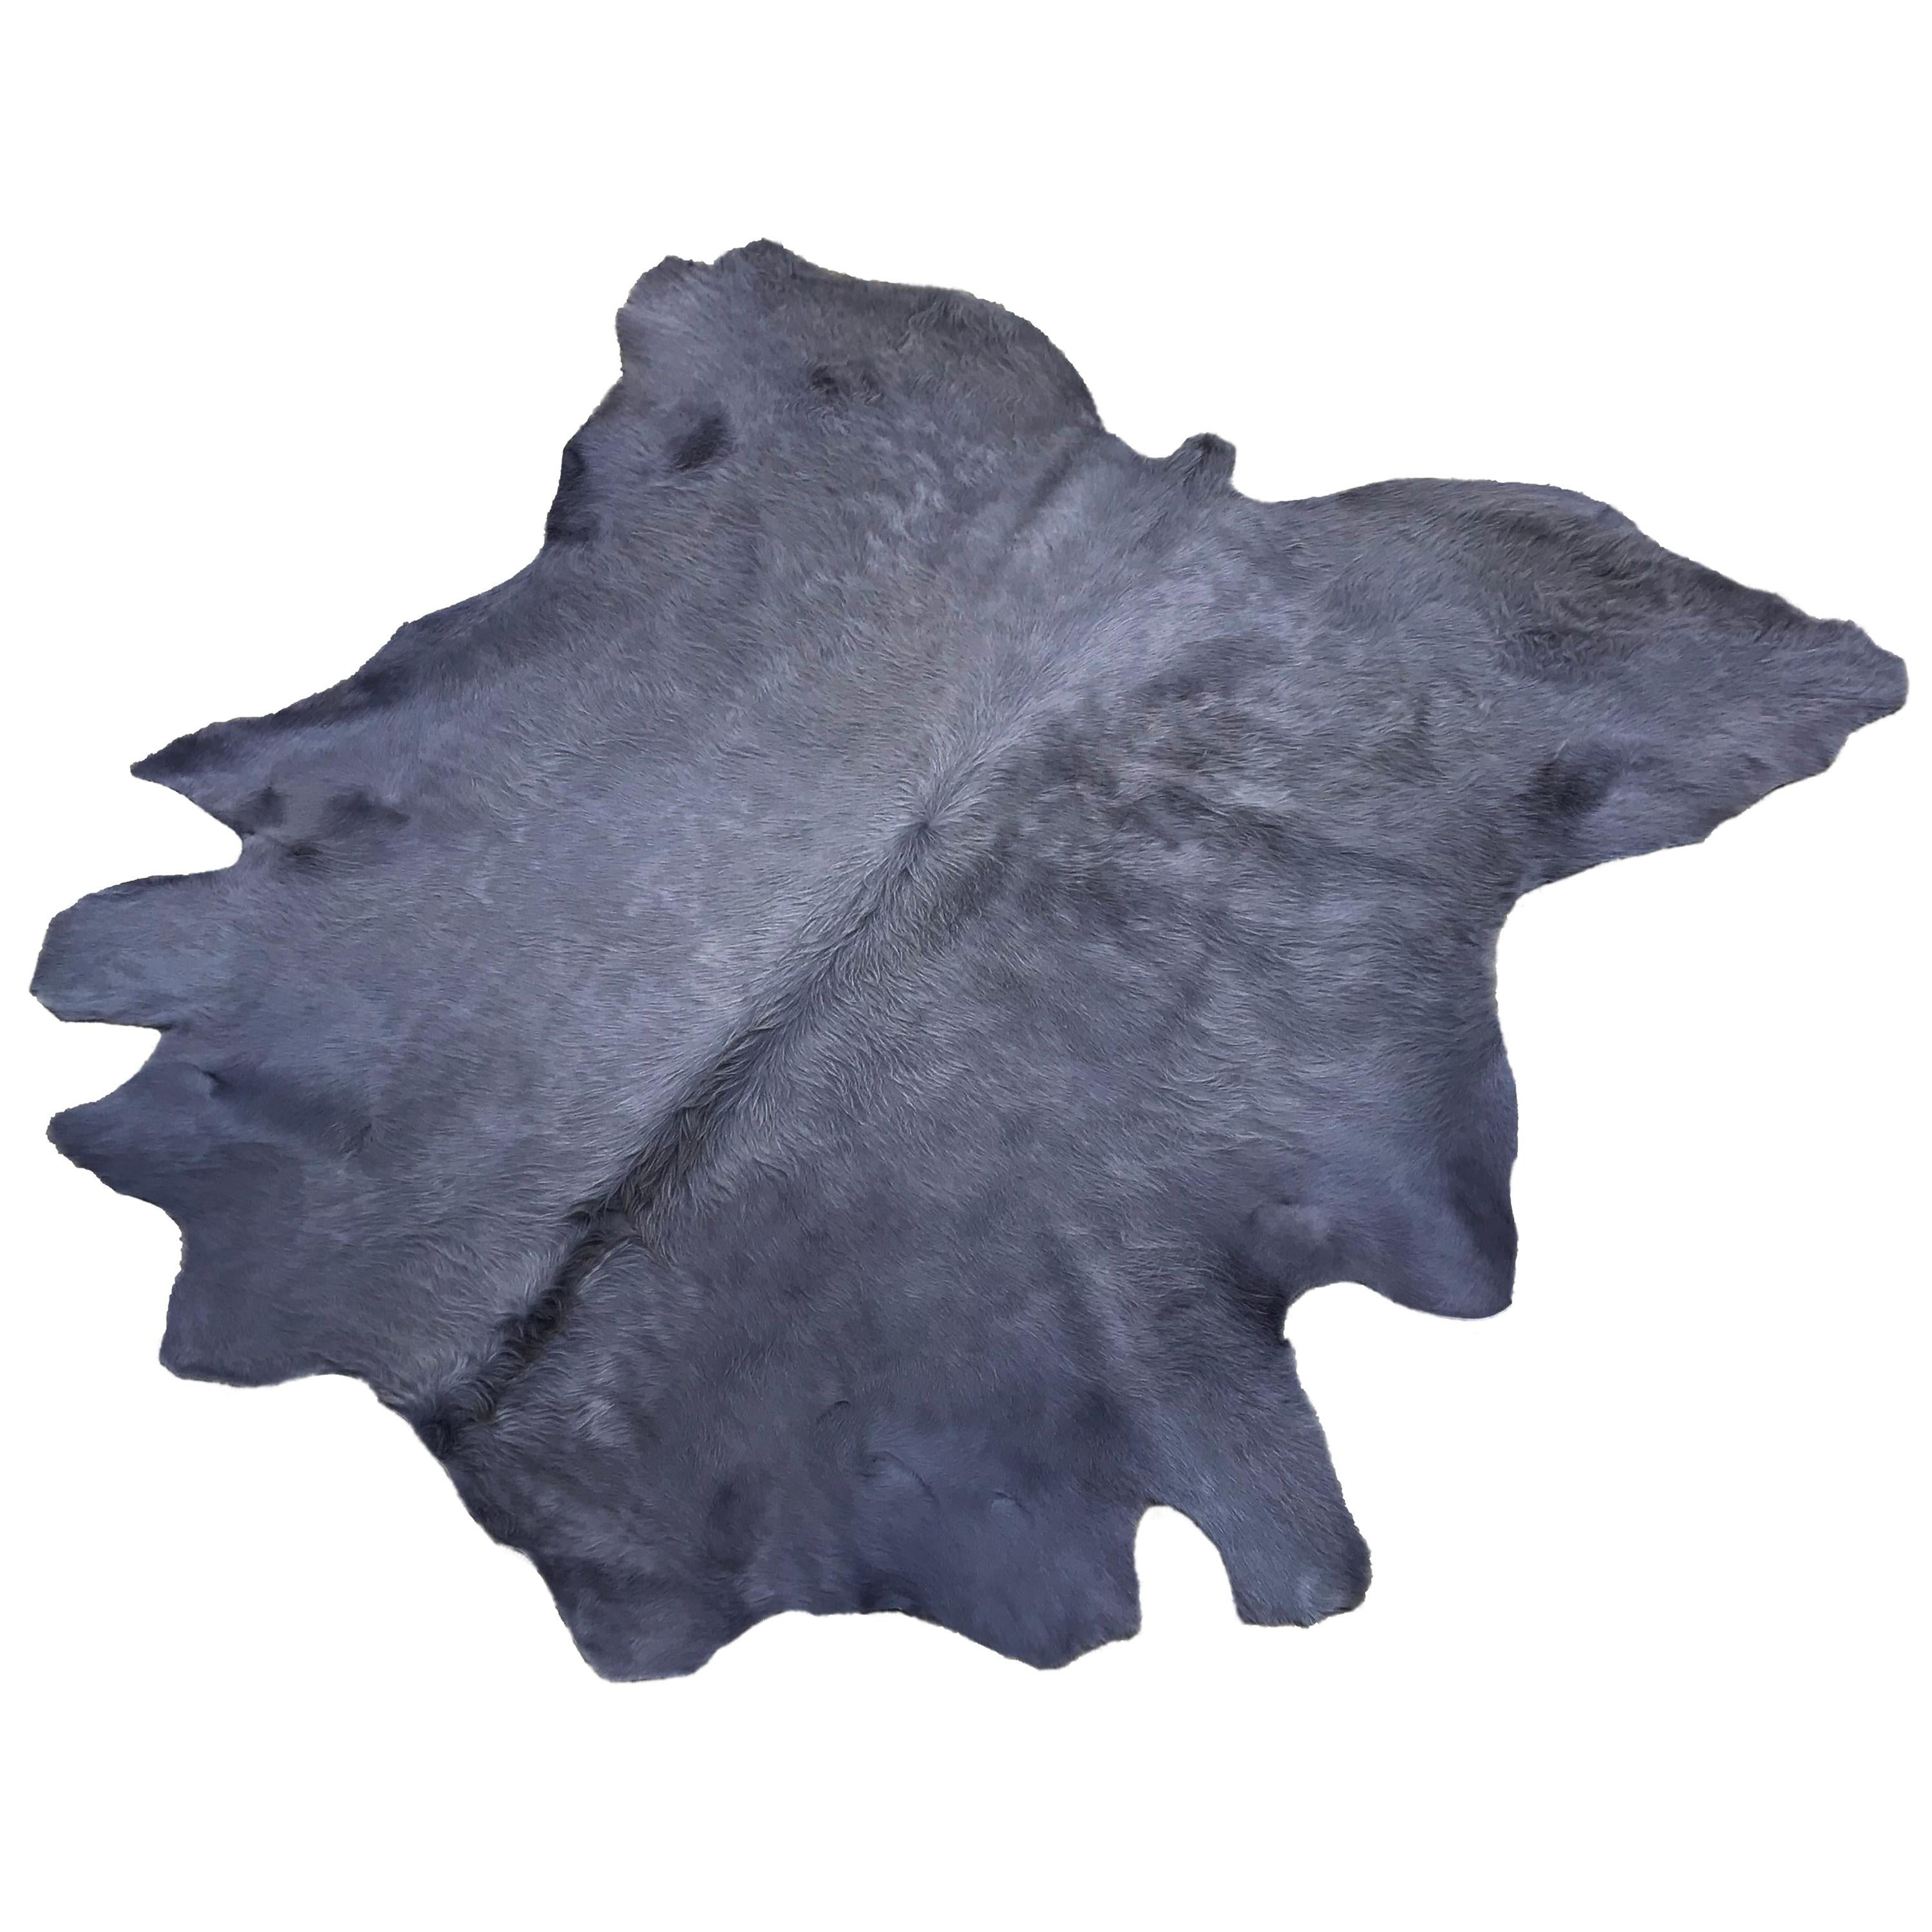 Cowhide Rug, Mid Grey, Hand-Dyed, Sustainably Sourced, Variety of Colors For Sale